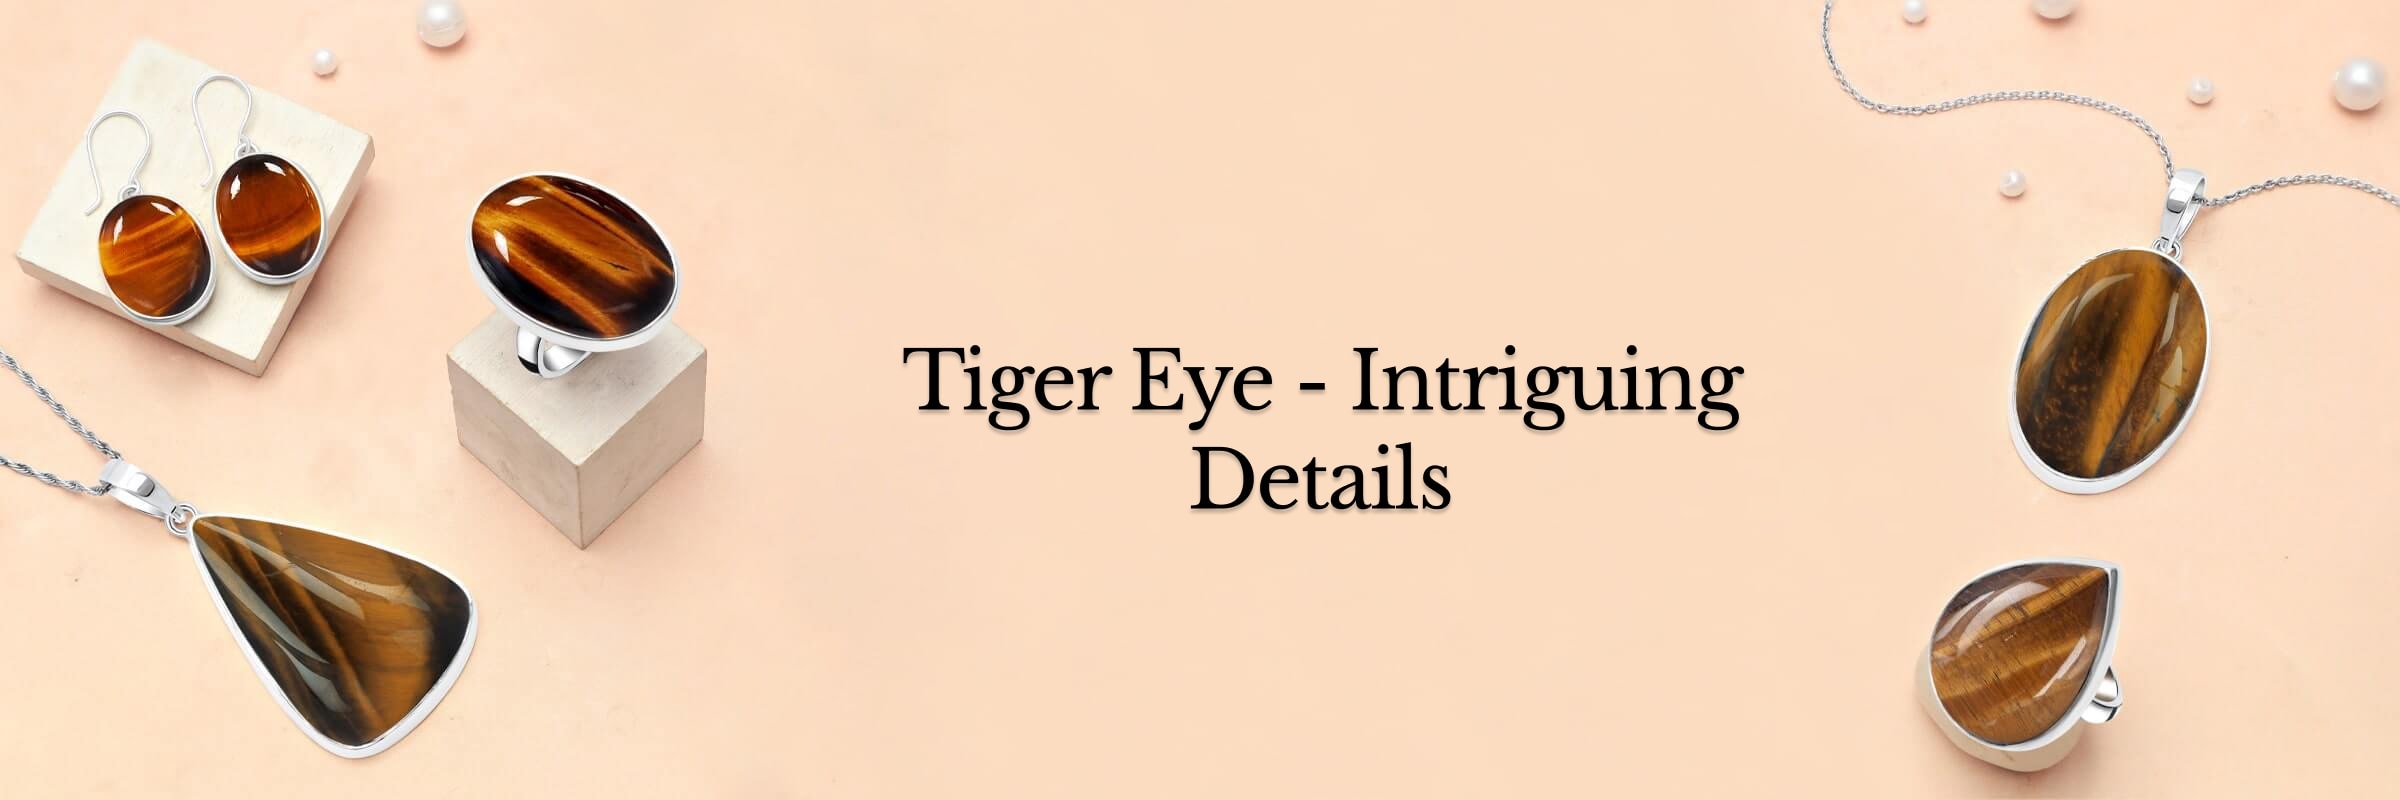 Facts about tiger eye